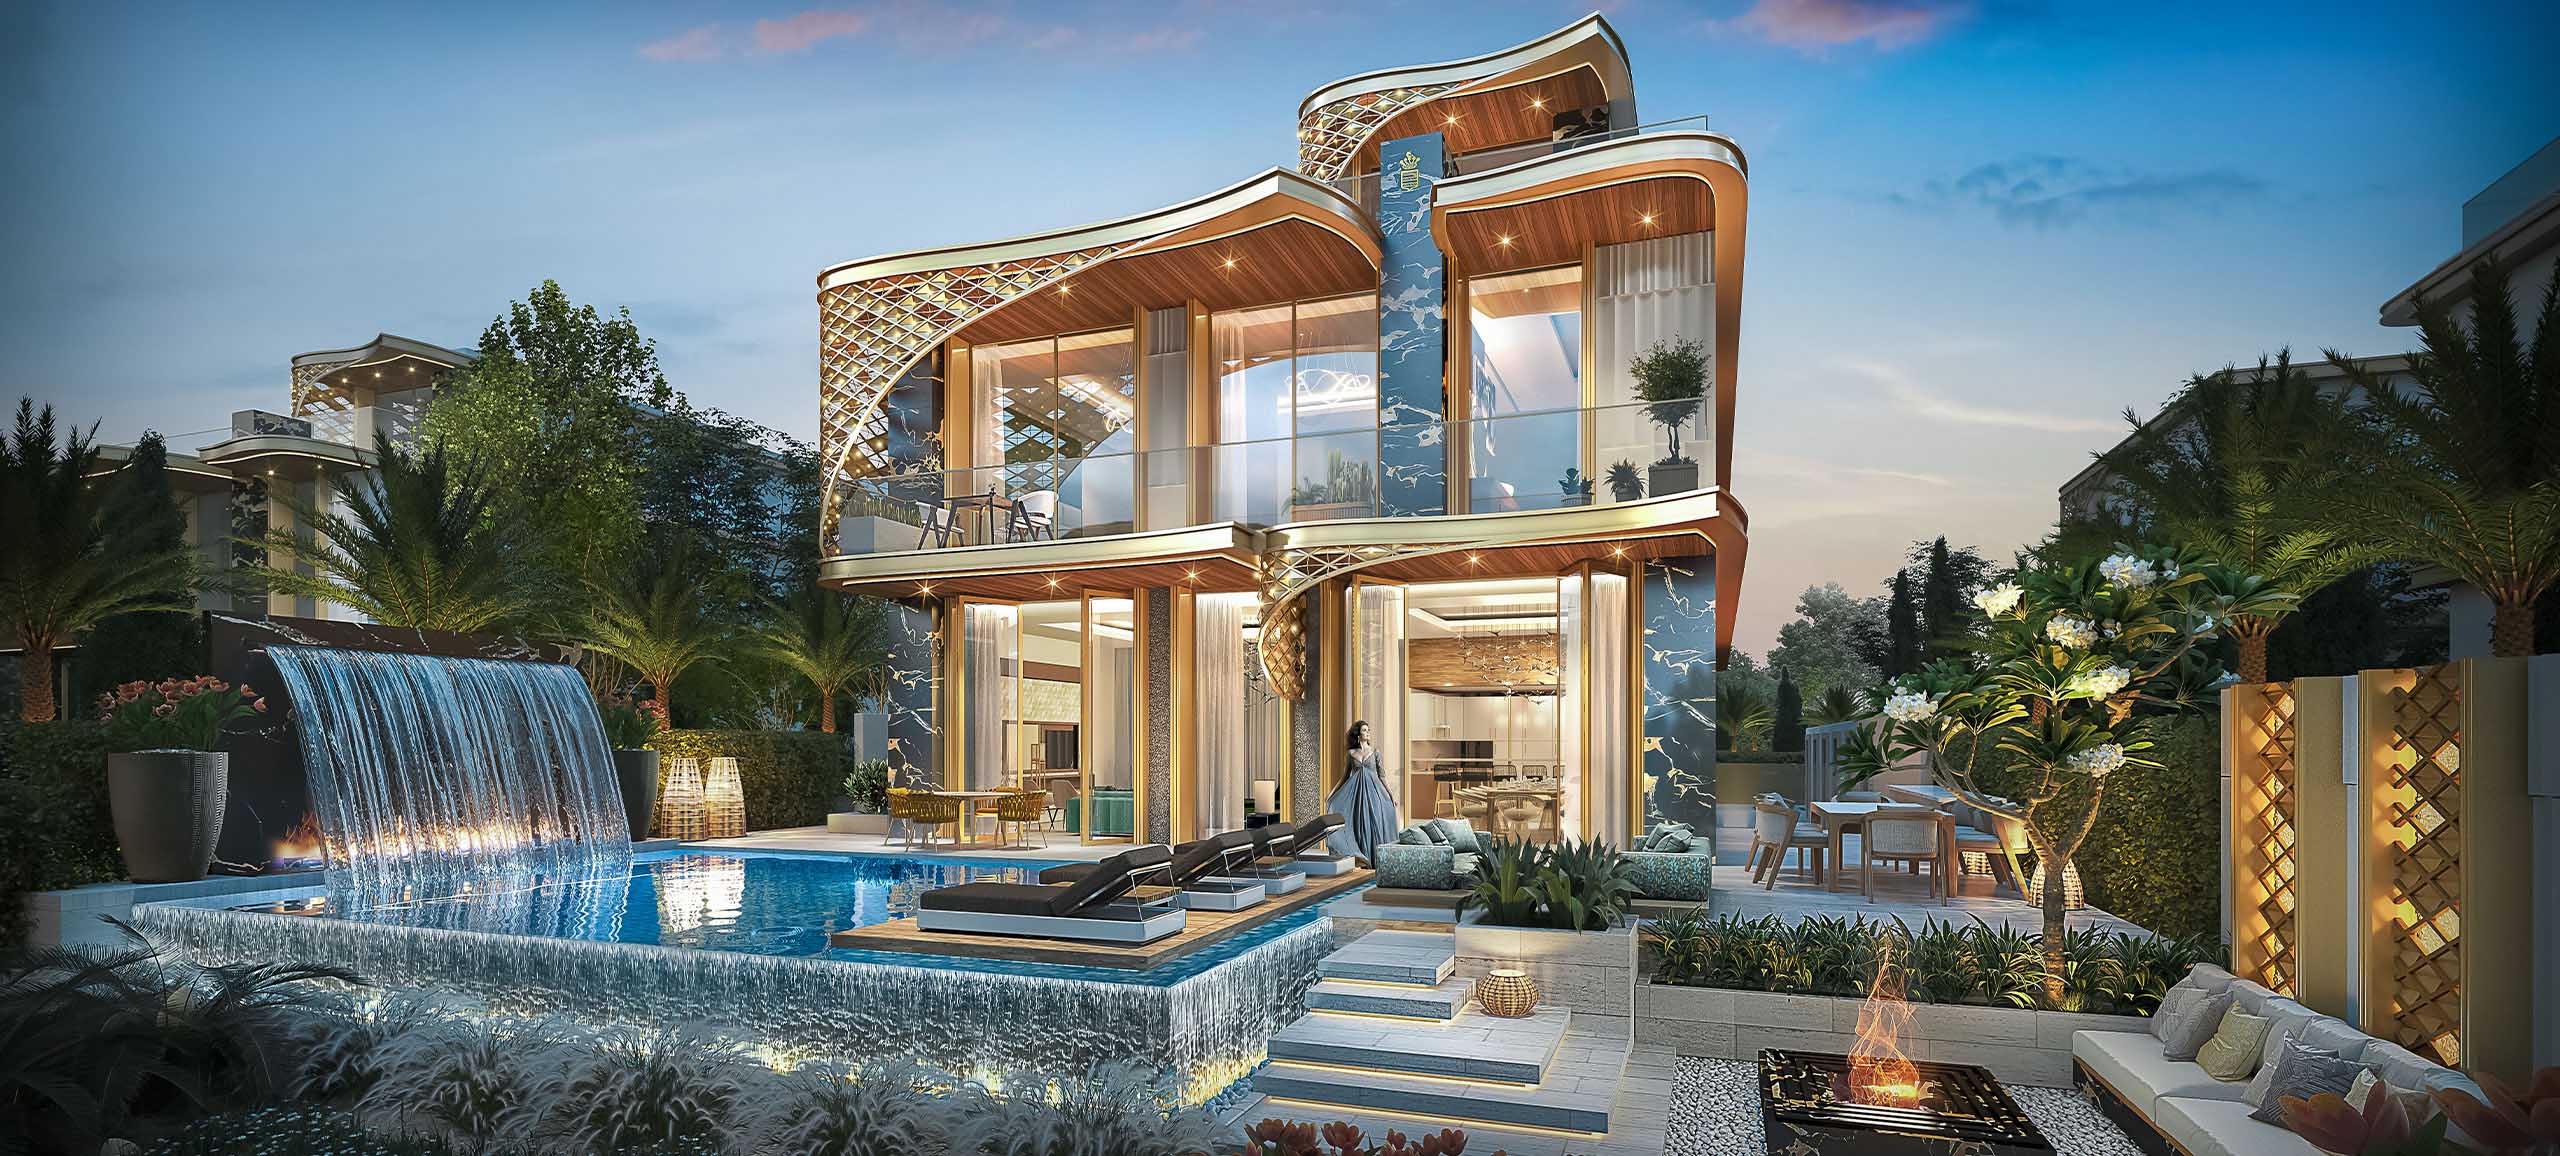 Dubai luxury real estate continues to grow at record-breaking levels